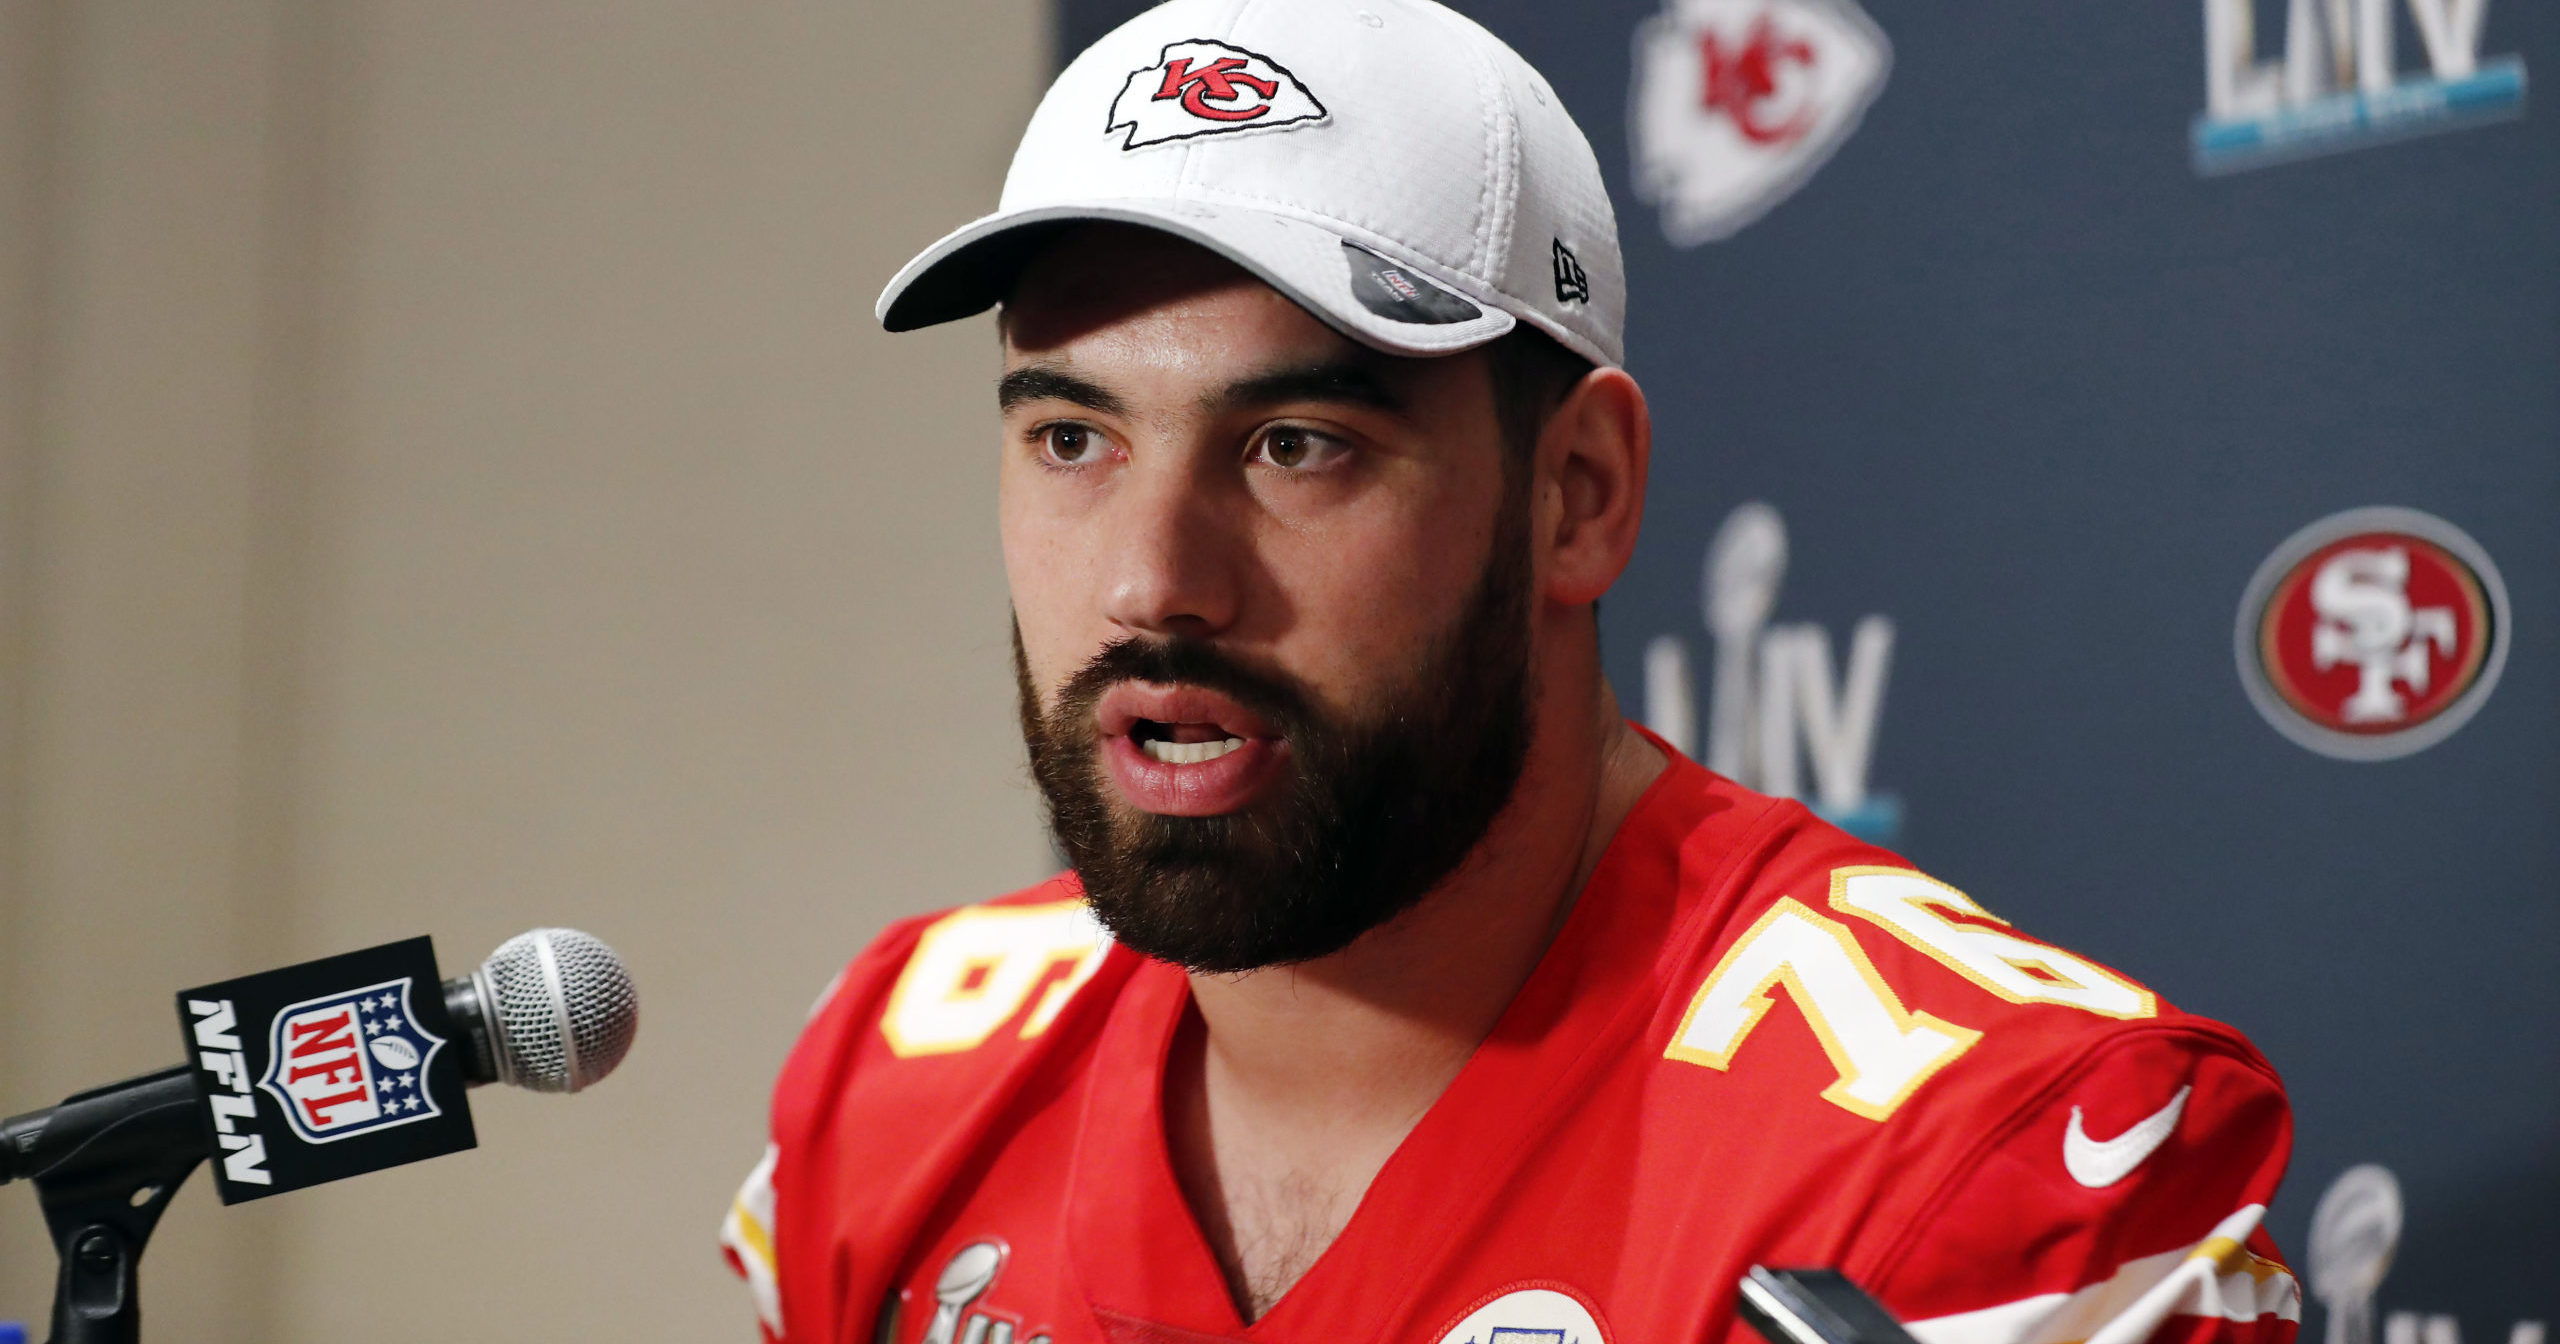 In this Jan. 29, 2020, file photo, Kansas City Chiefs offensive guard Laurent Duvernay-Tardif speaks during a news conference in Aventura, Florida, before the Super Bowl. Duvernay-Tardif became the first player to opt out of the upcoming NFL season due to the coronavirus pandemic on July 24, 2020.